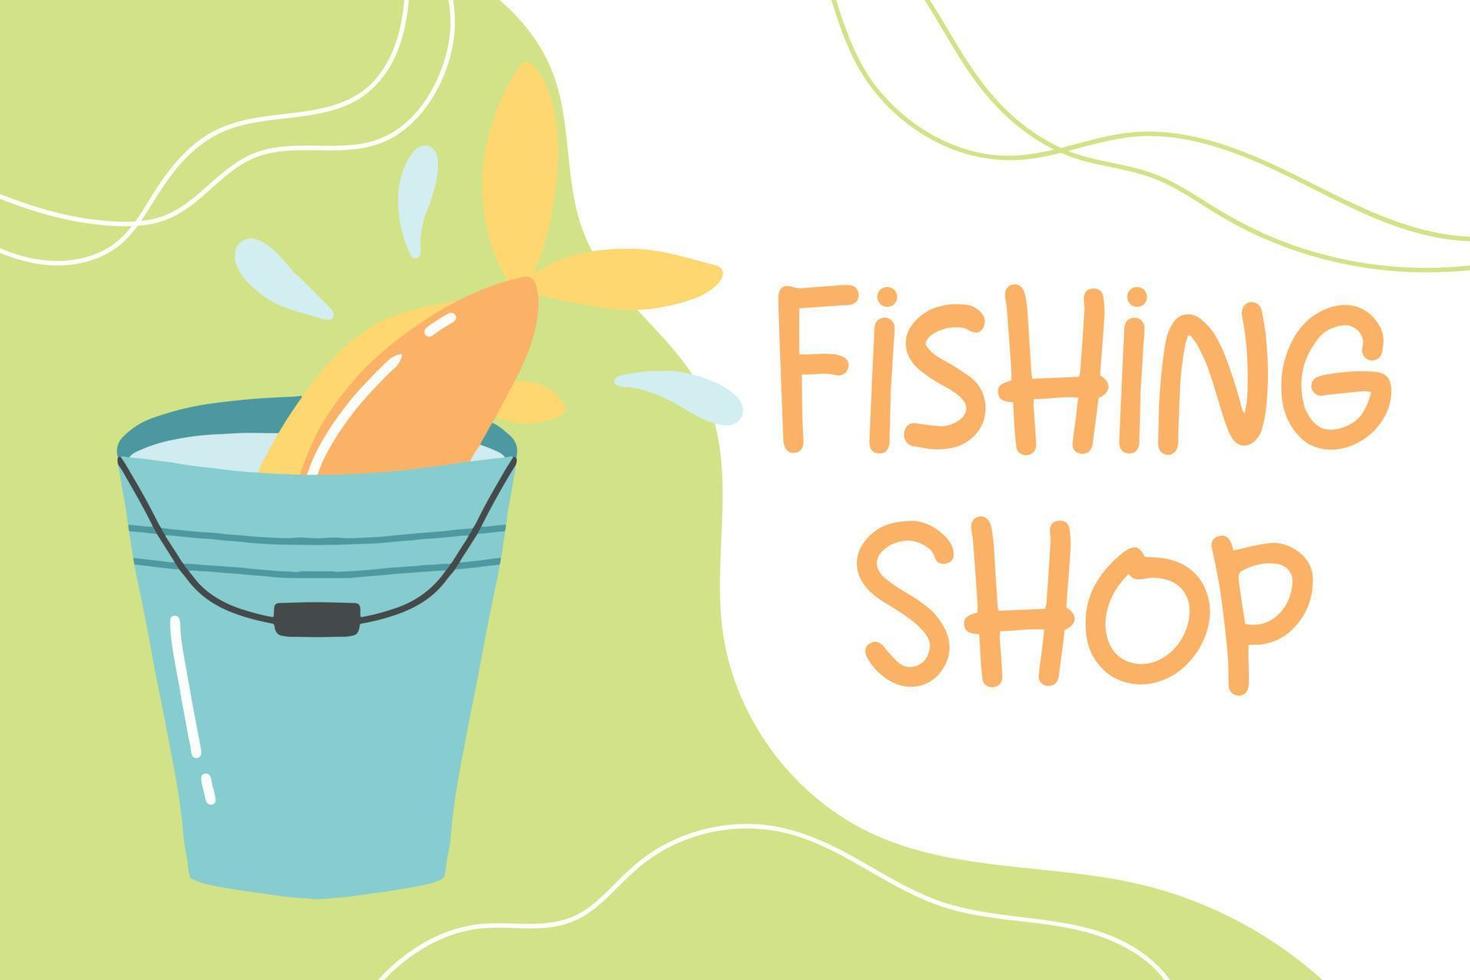 Fishing shop. Flyer for a fishing store. Vector illustration.